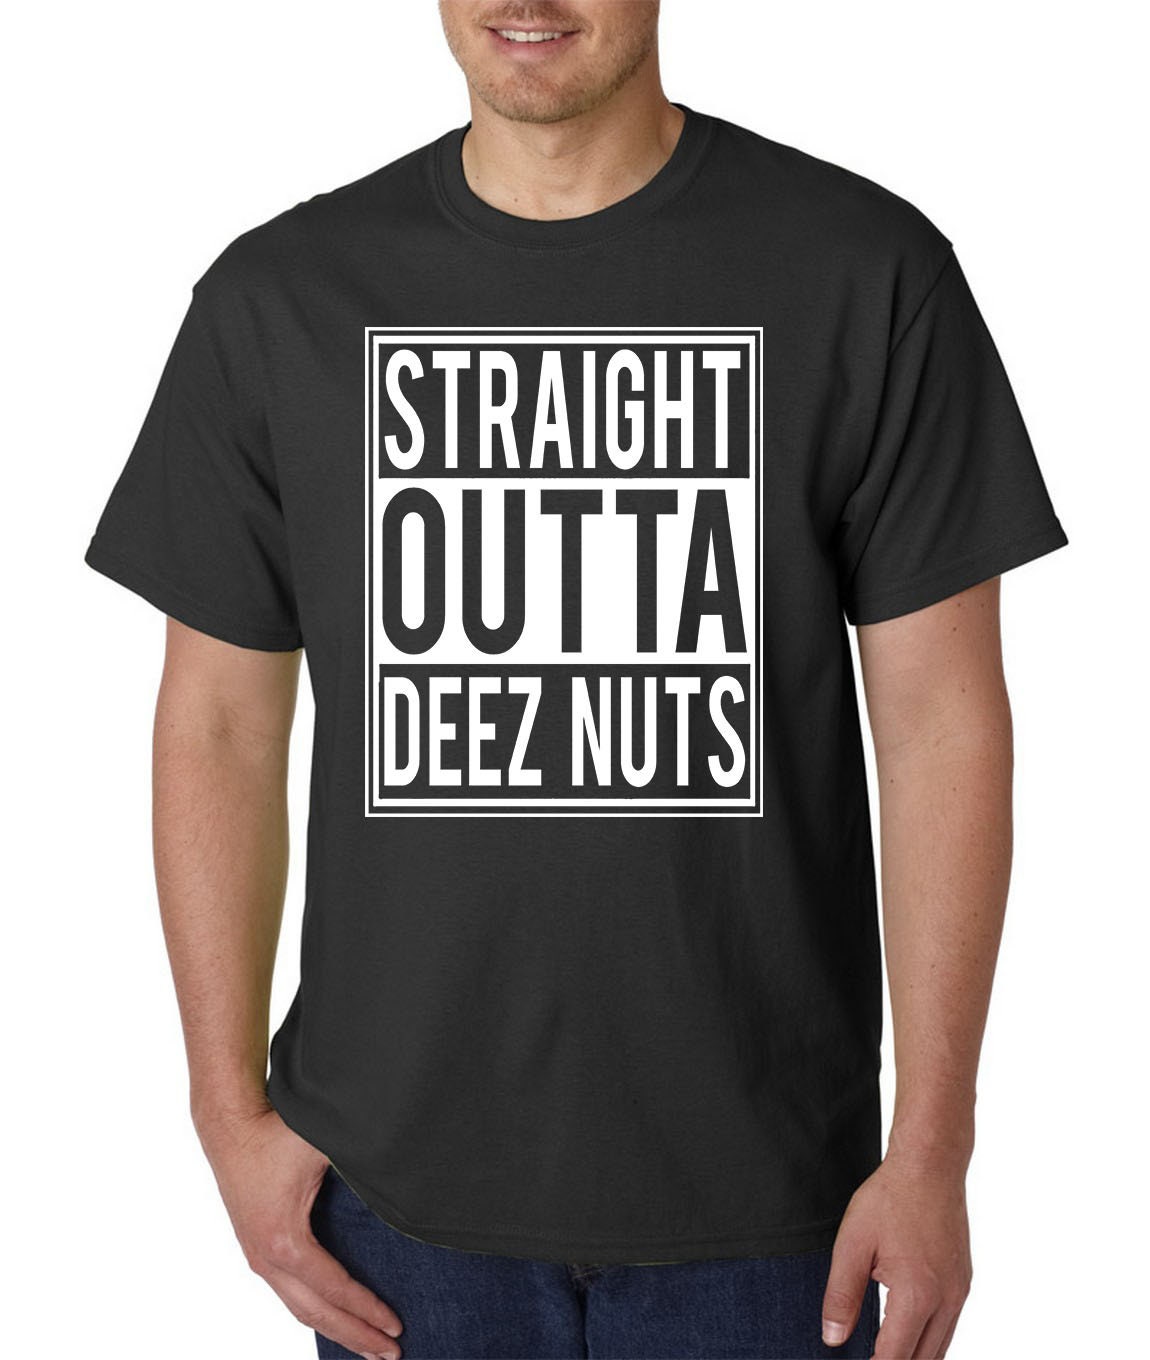 Straight Outta NUTS Funny Offensive - Etsy